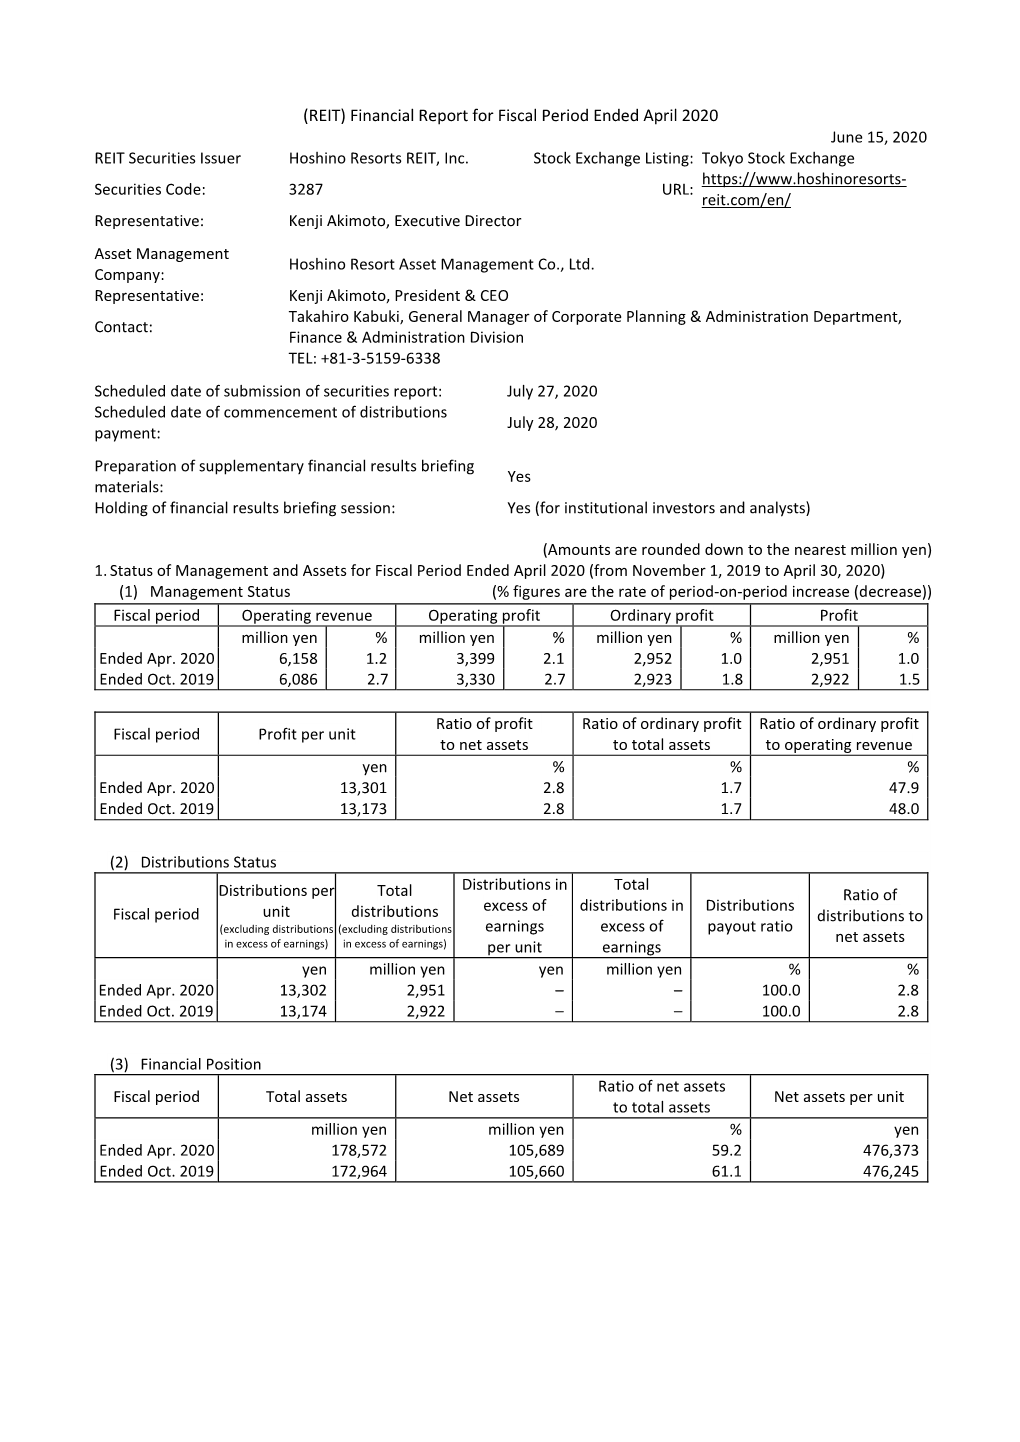 (REIT) Financial Report for Fiscal Period Ended April 2020 June 15, 2020 REIT Securities Issuer Hoshino Resorts REIT, Inc